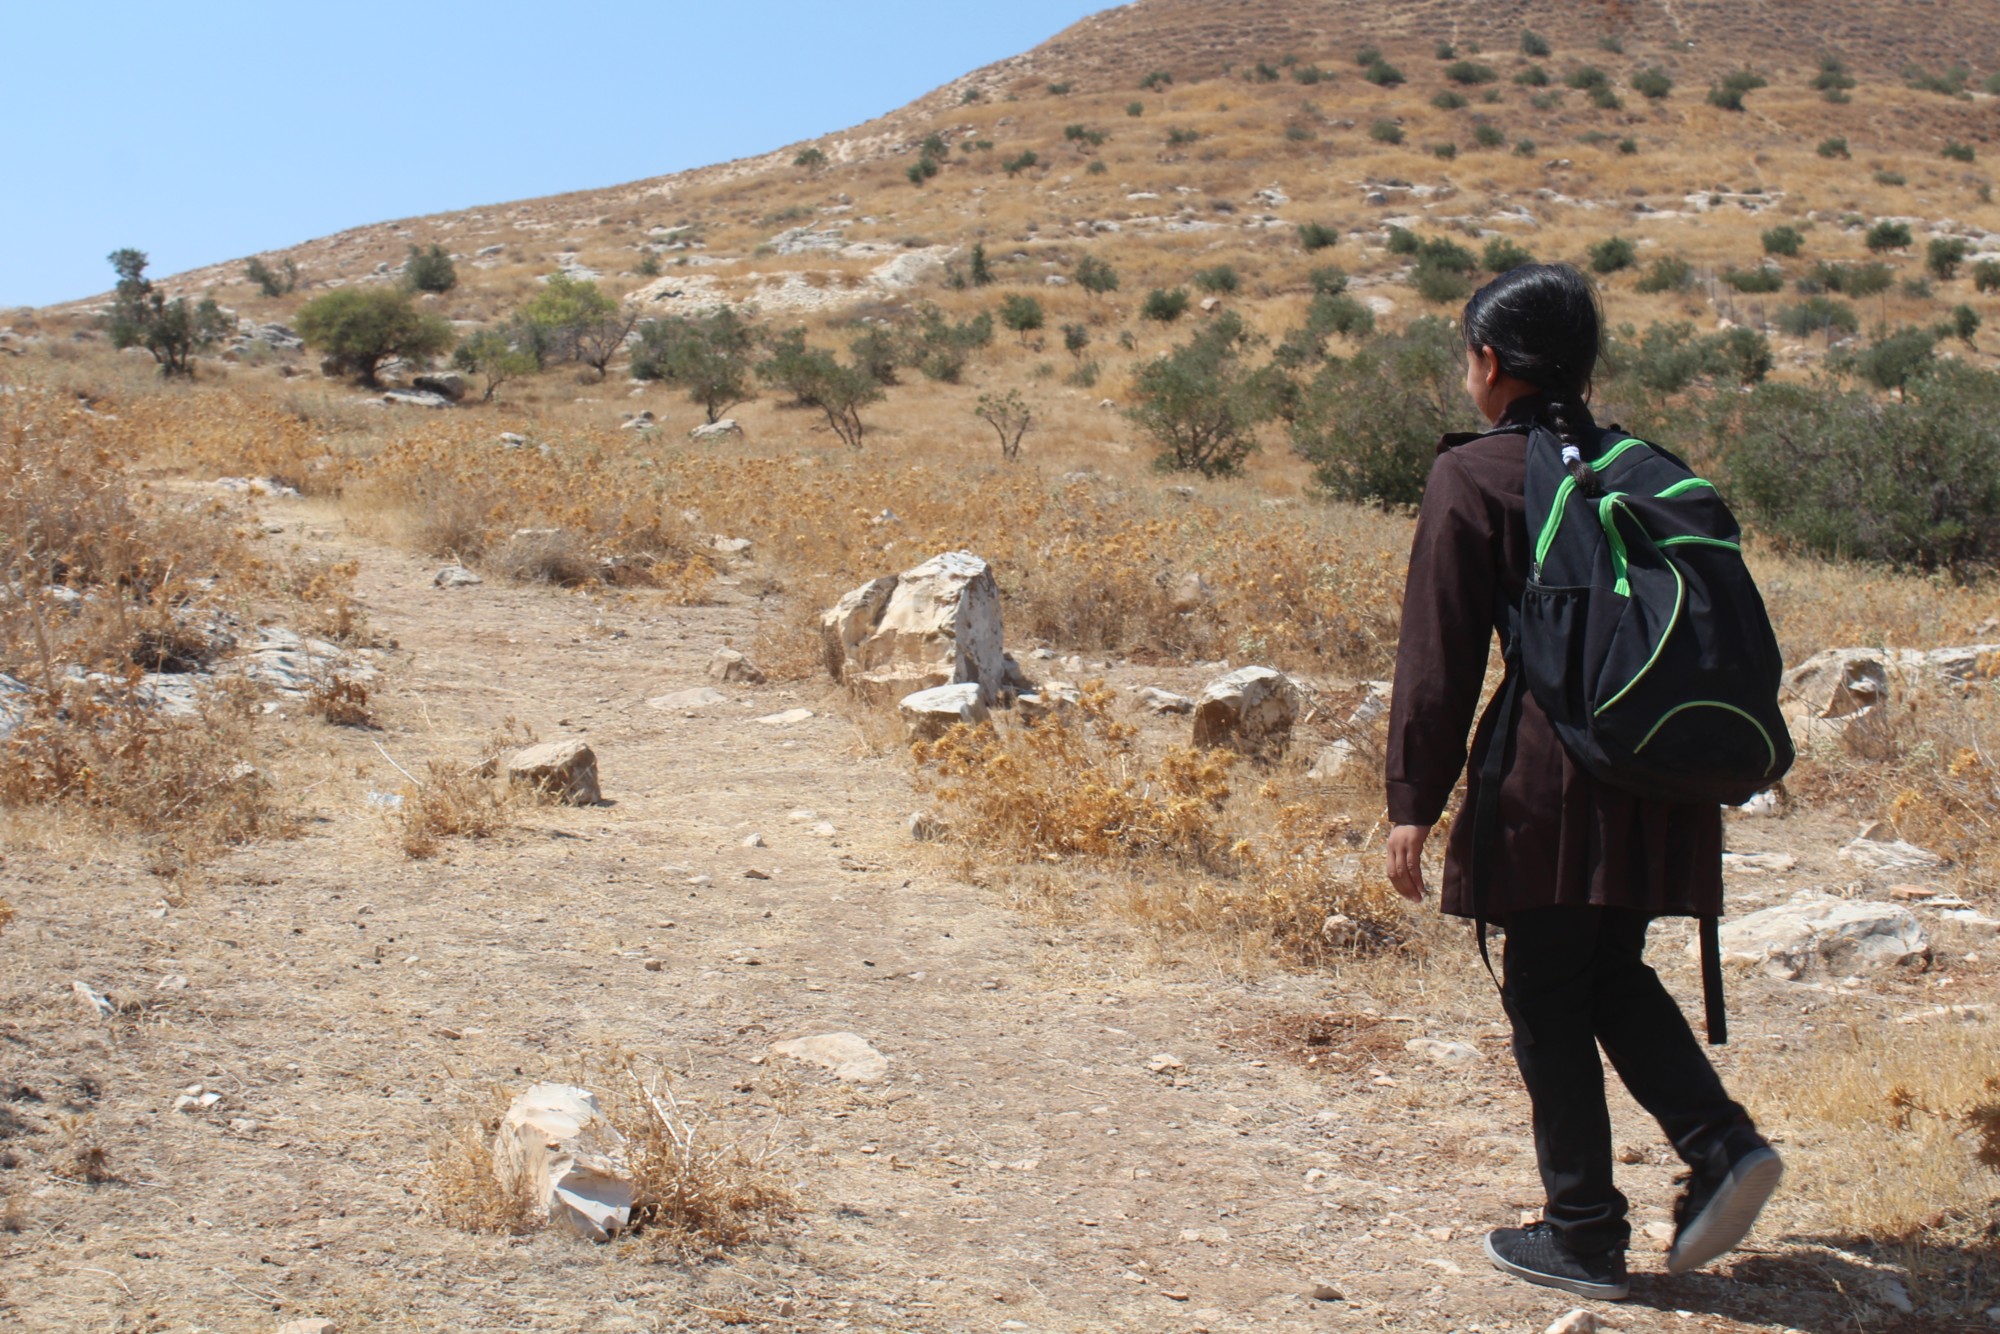 Ibtisam, like many other children in Area C, has to walk on craggy dirt roads to go to school (MEE/Shatha Hammad)